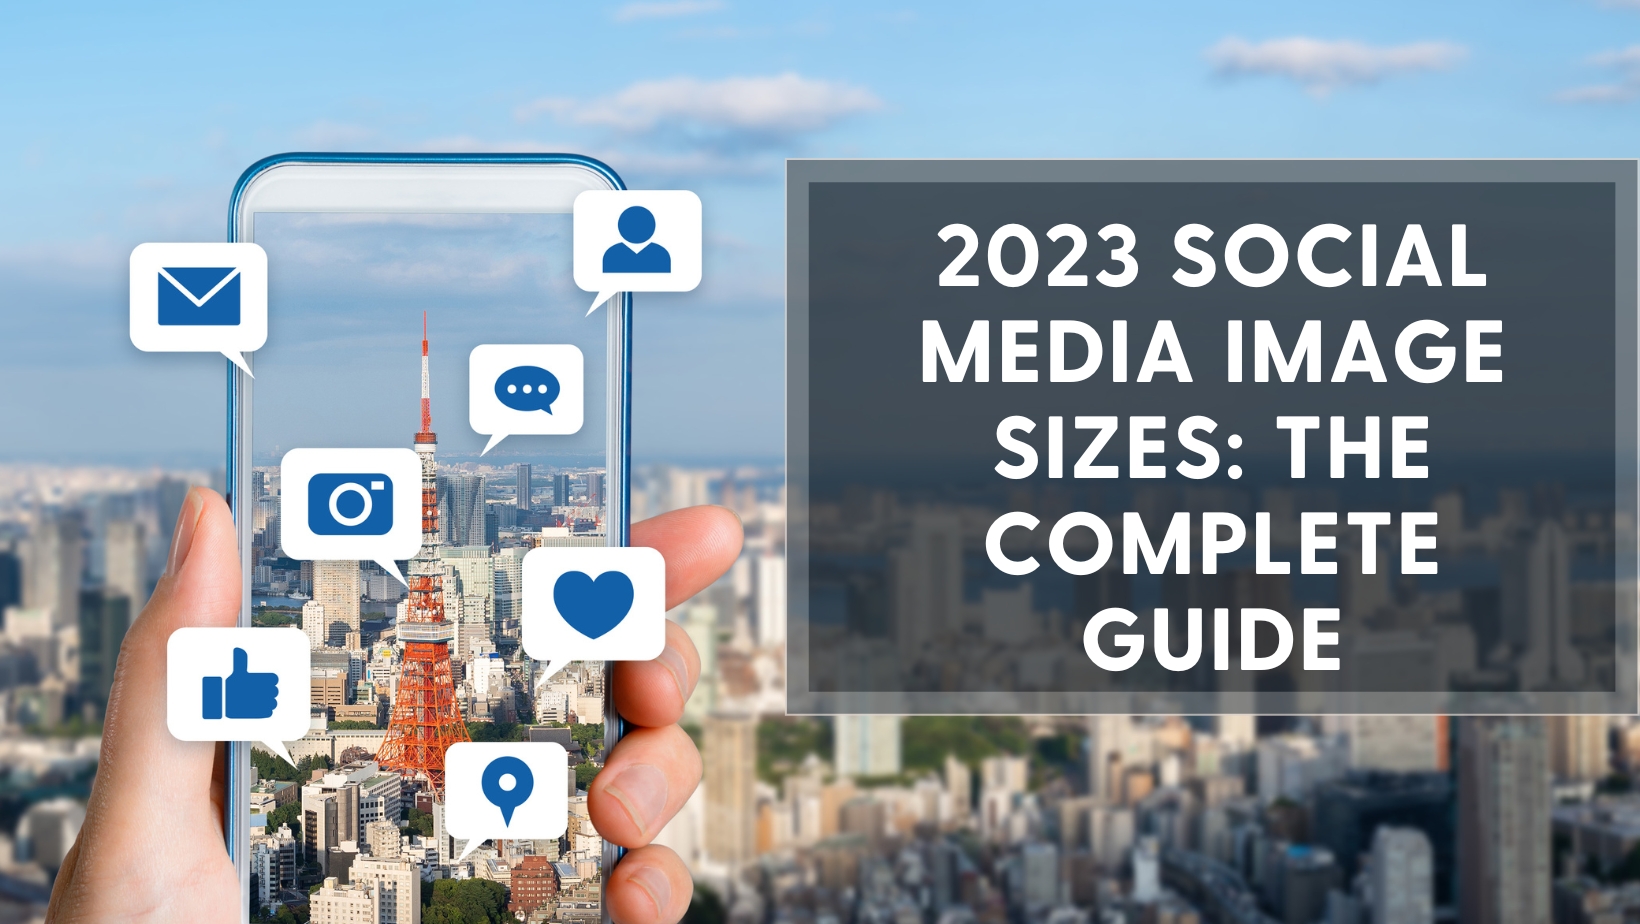 2023 Social Media Image Sizes: The Complete Guide